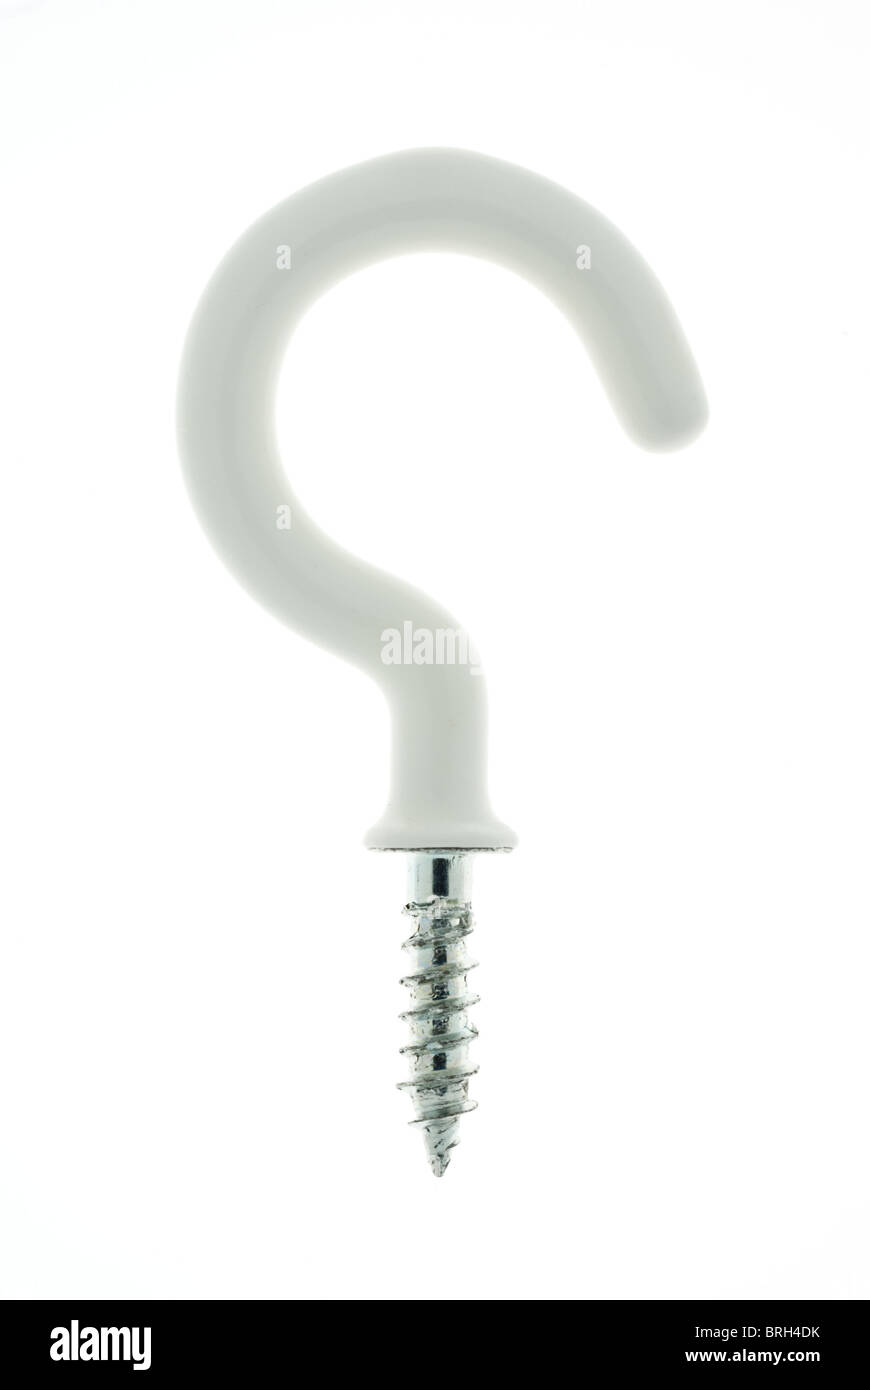 https://c8.alamy.com/comp/BRH4DK/plastic-covered-cup-hook-isolated-on-white-BRH4DK.jpg